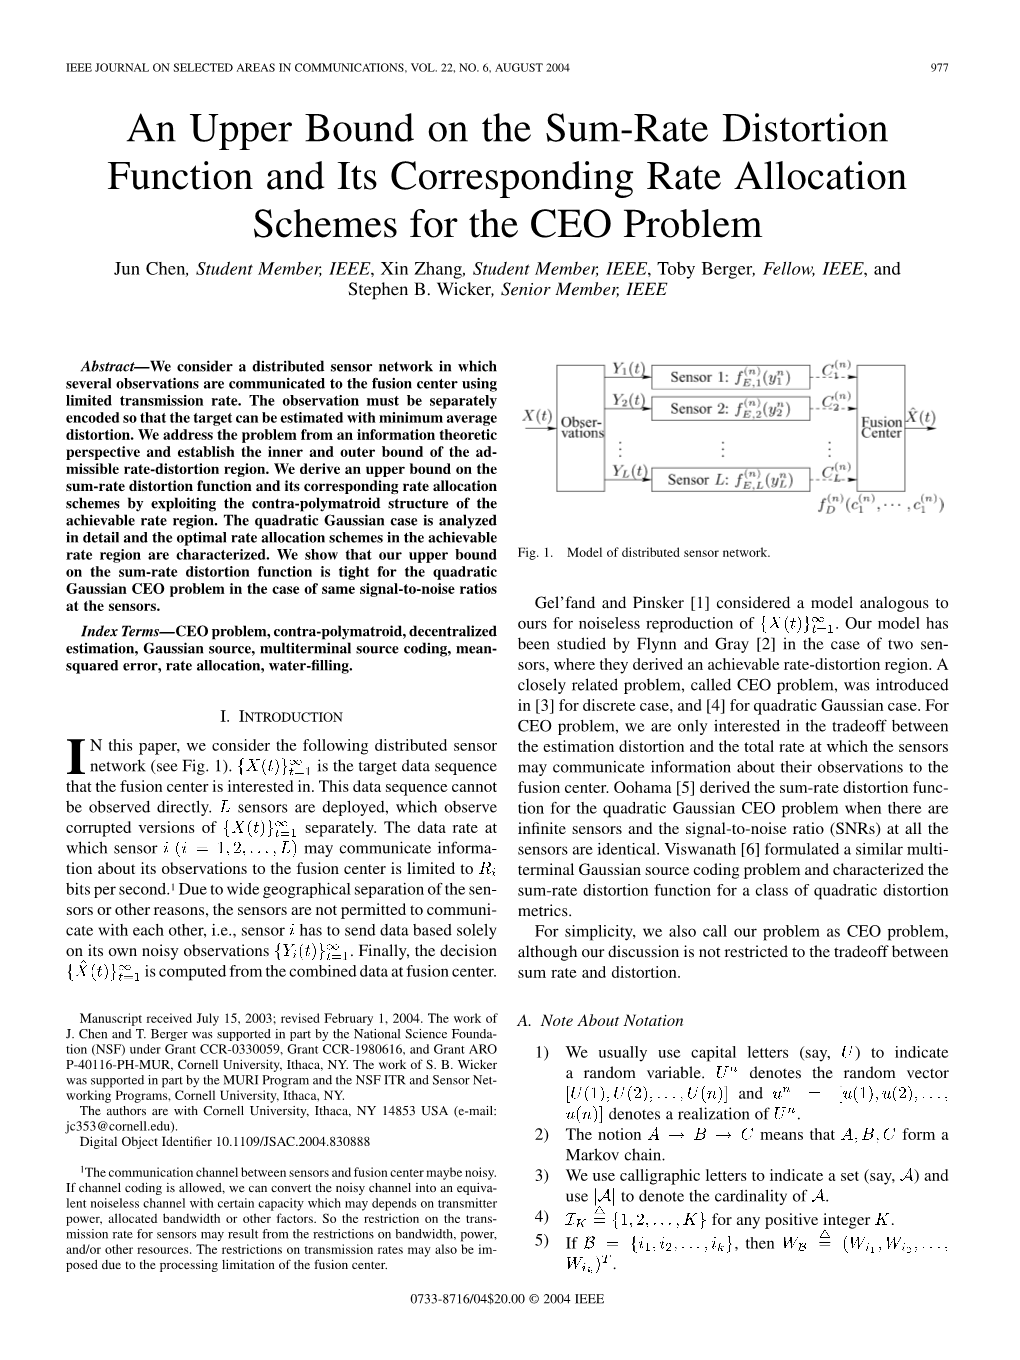 An Upper Bound on the Sum-Rate Distortion Function and Its Corresponding Rate Allocation Schemes for the CEO Problem